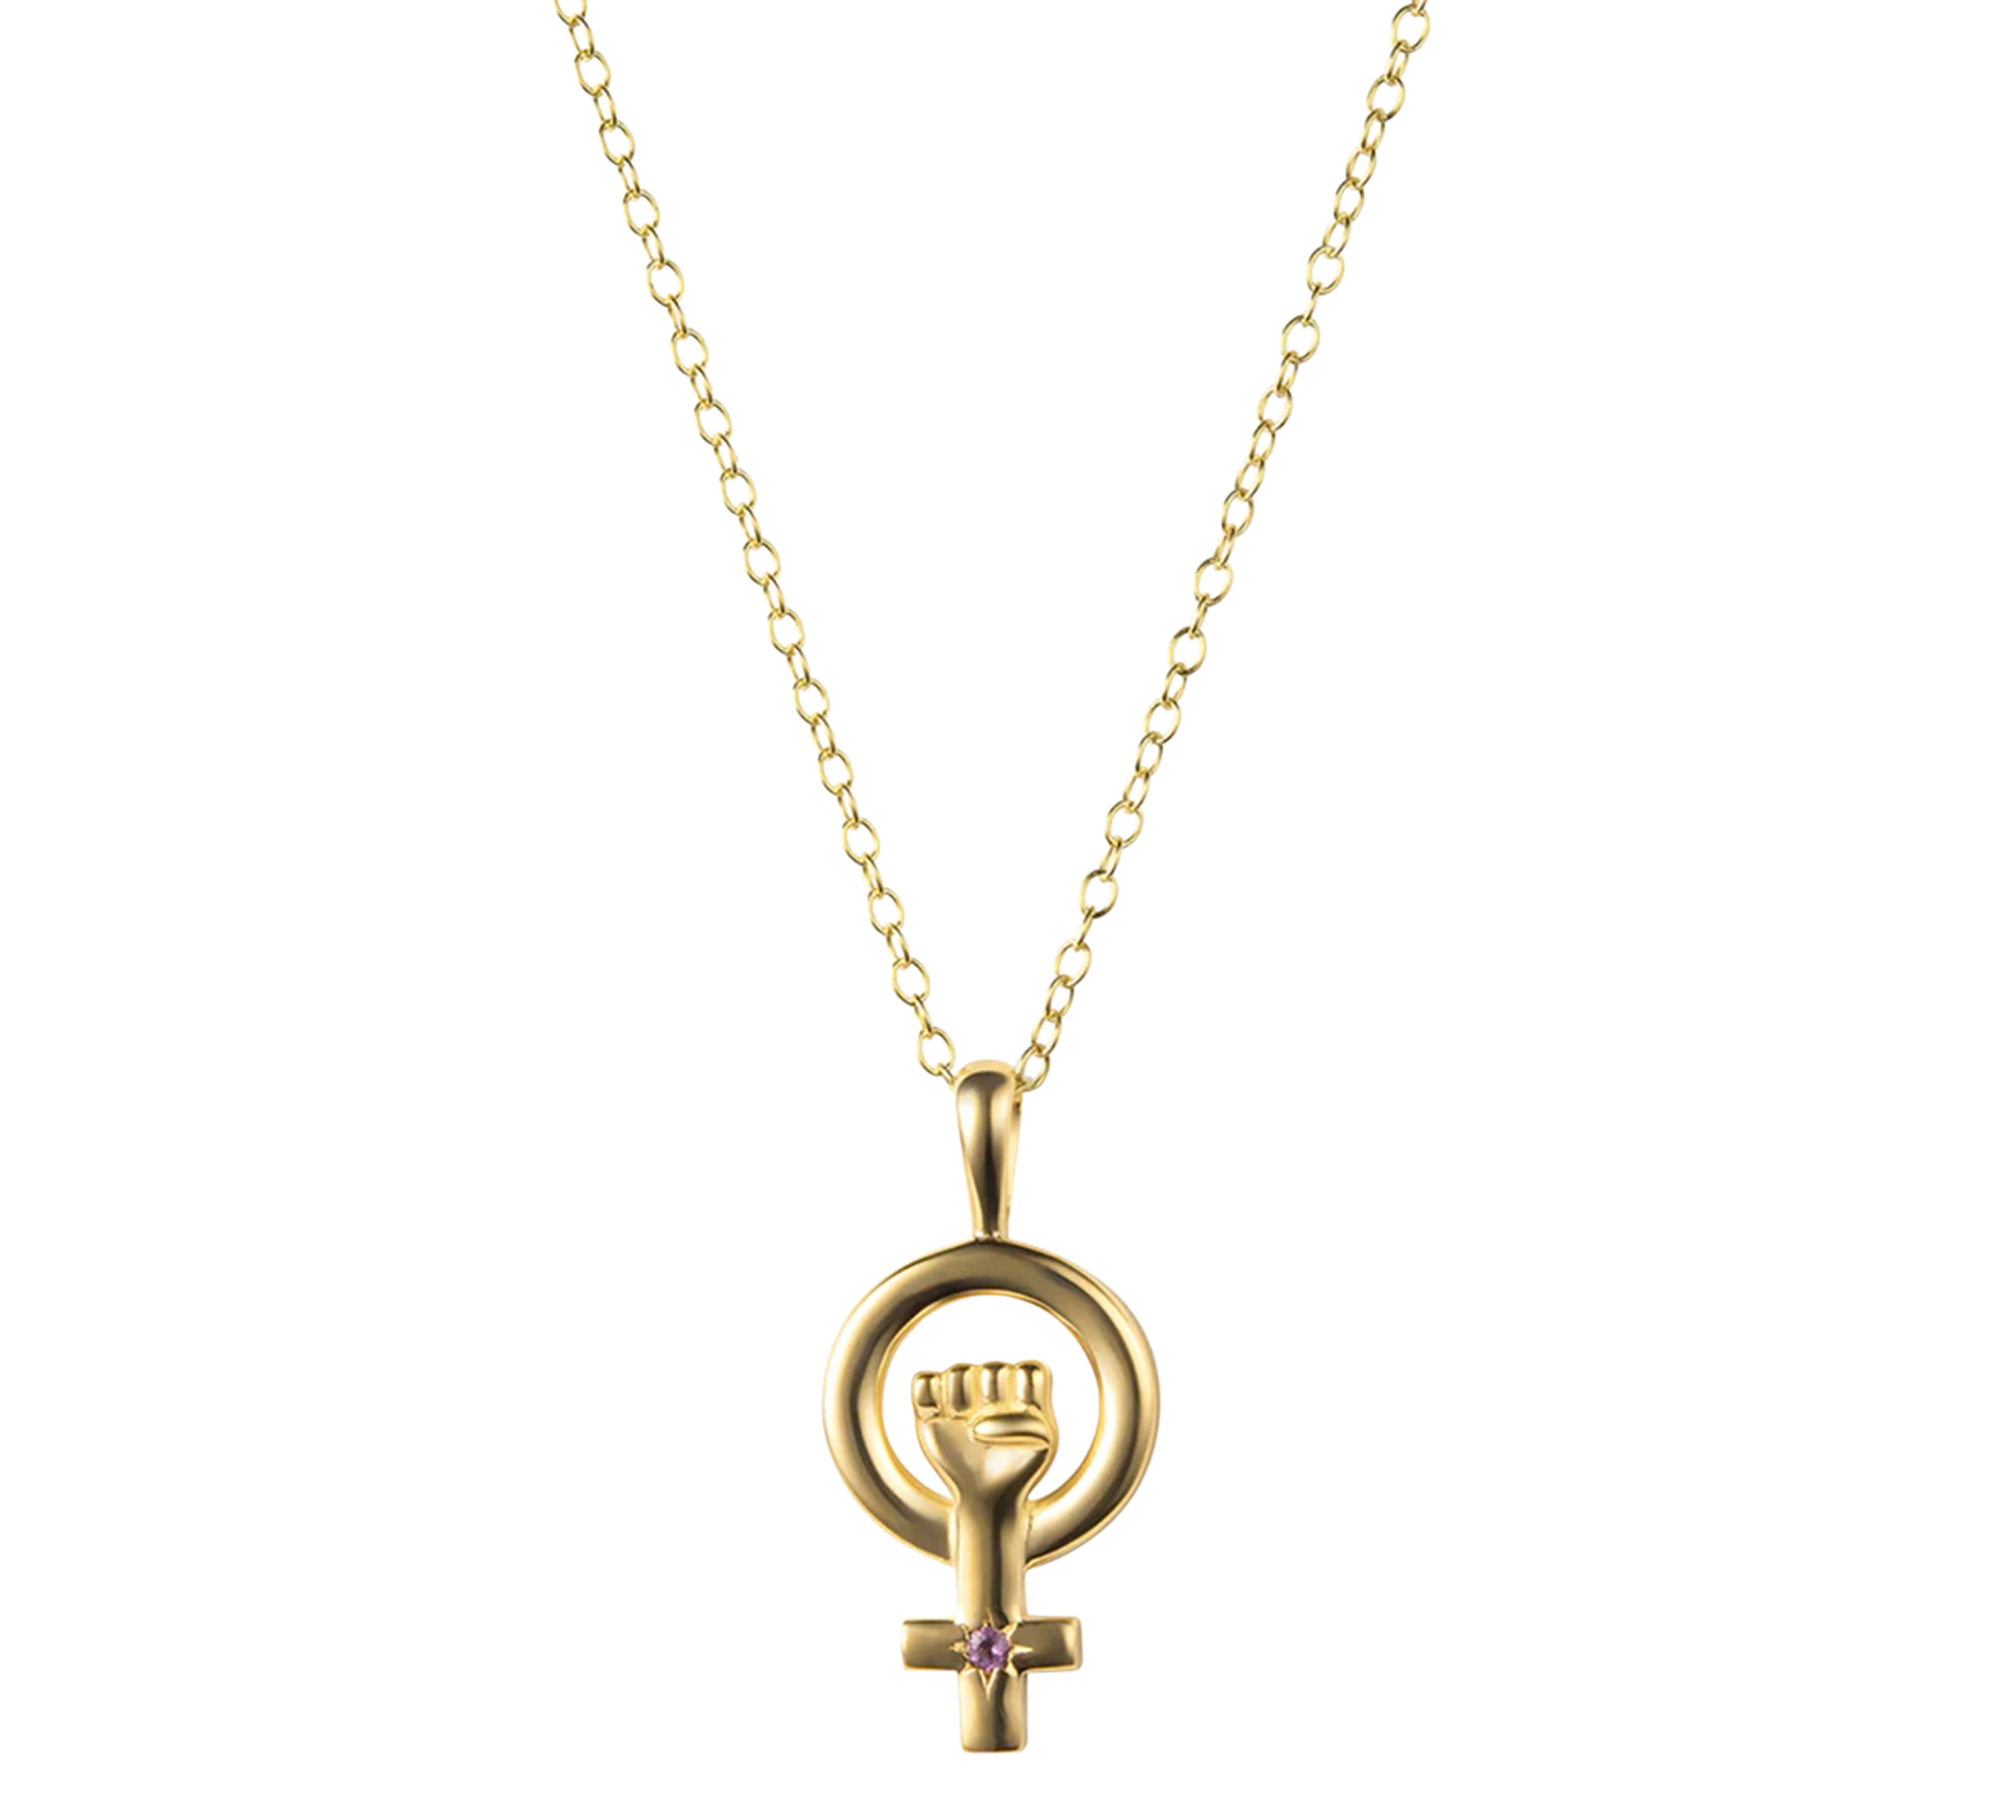 The gold woman power necklace from Awe Inspired features a clenched fist mixed with the Venus symbol